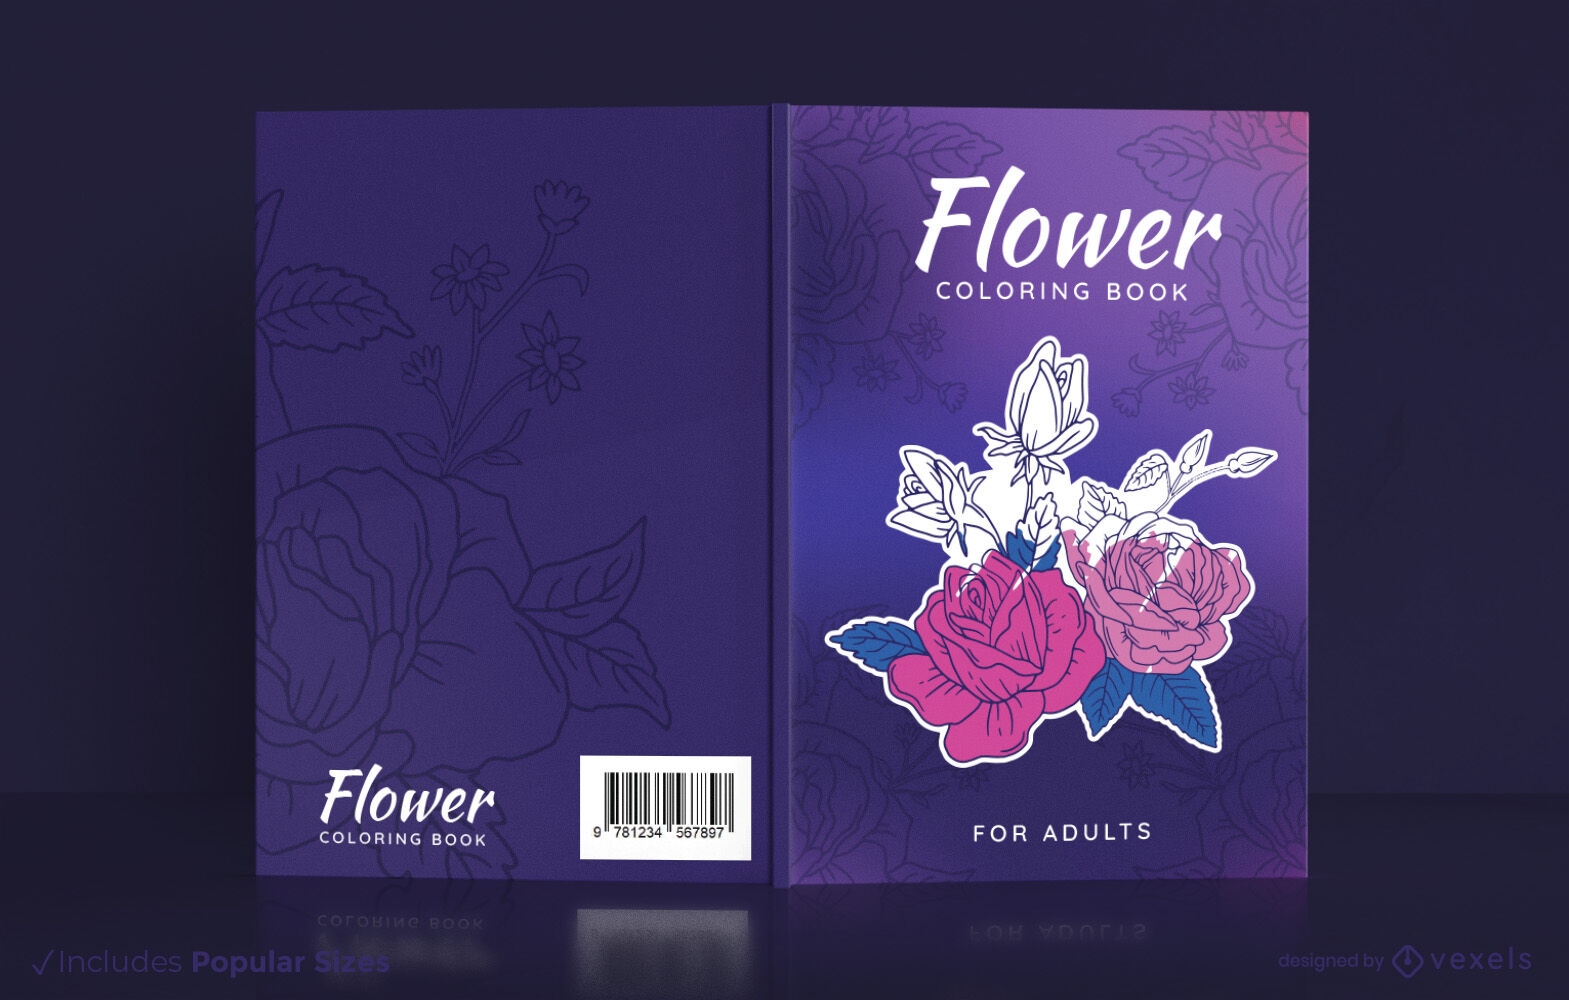 Flowers coloring book cover design